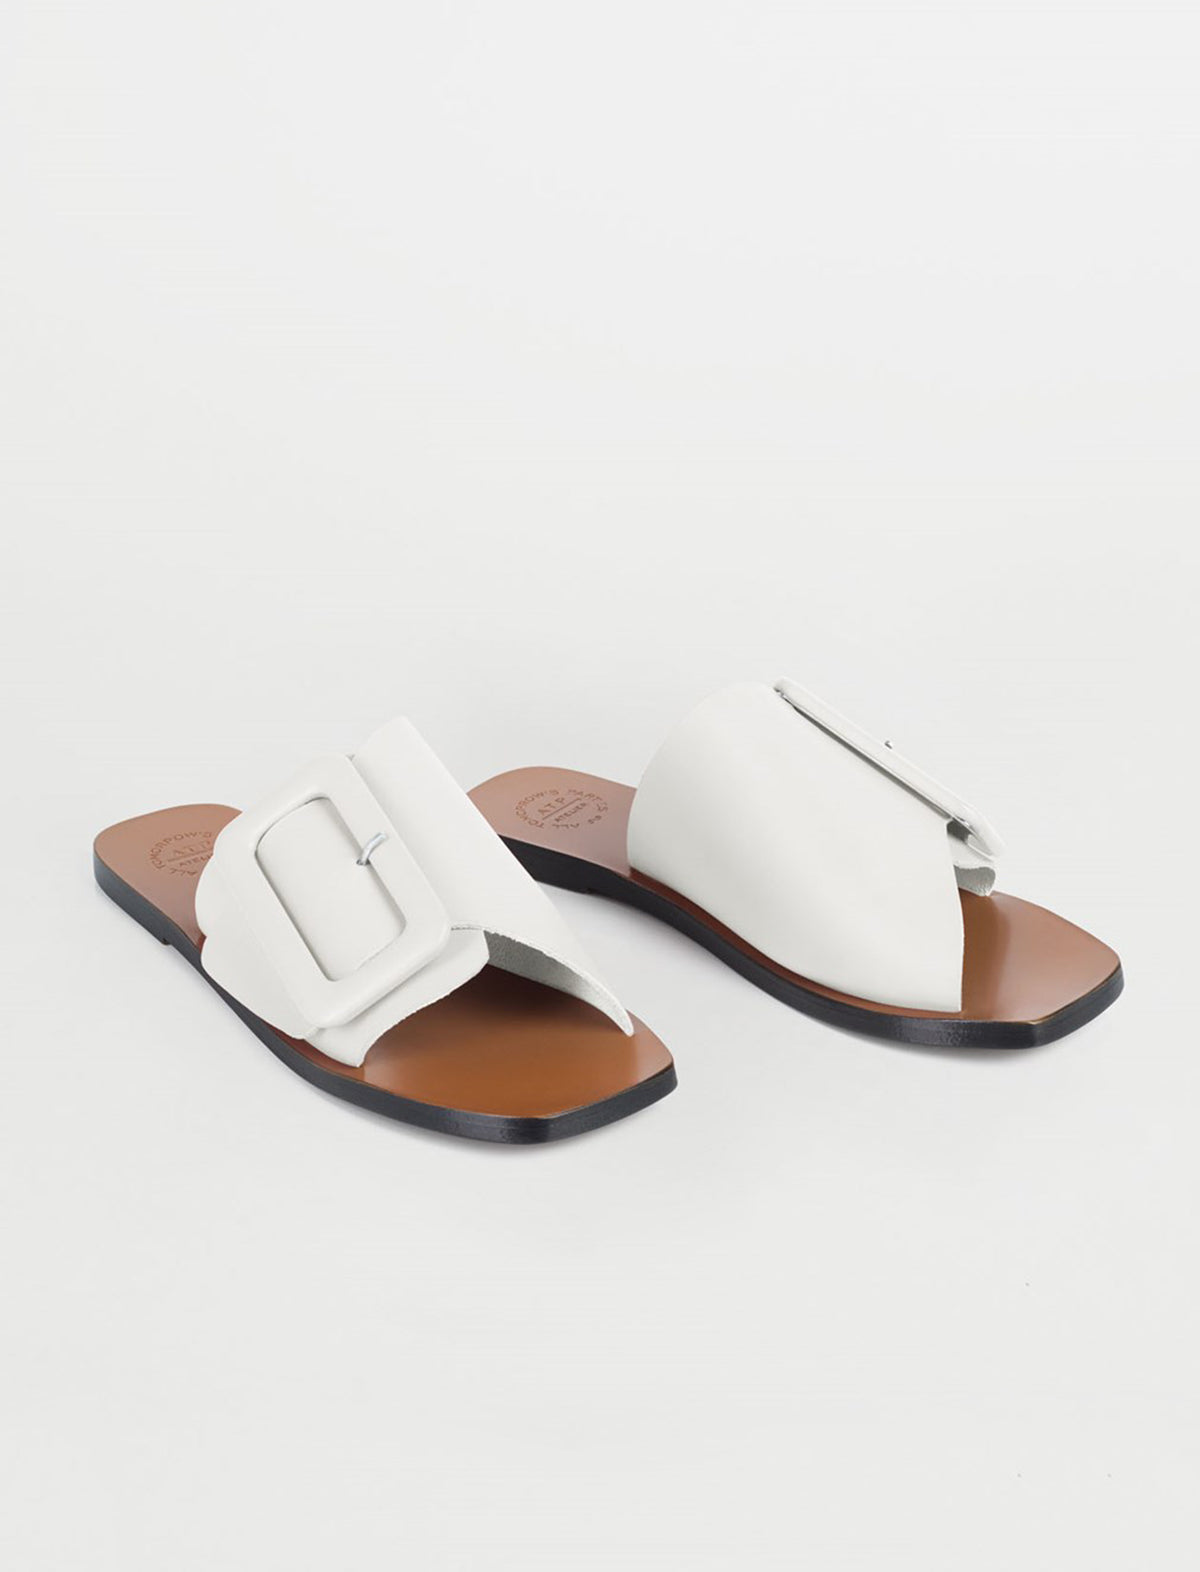 ATP Atelier Ceci Buckled Flat Sandals in White